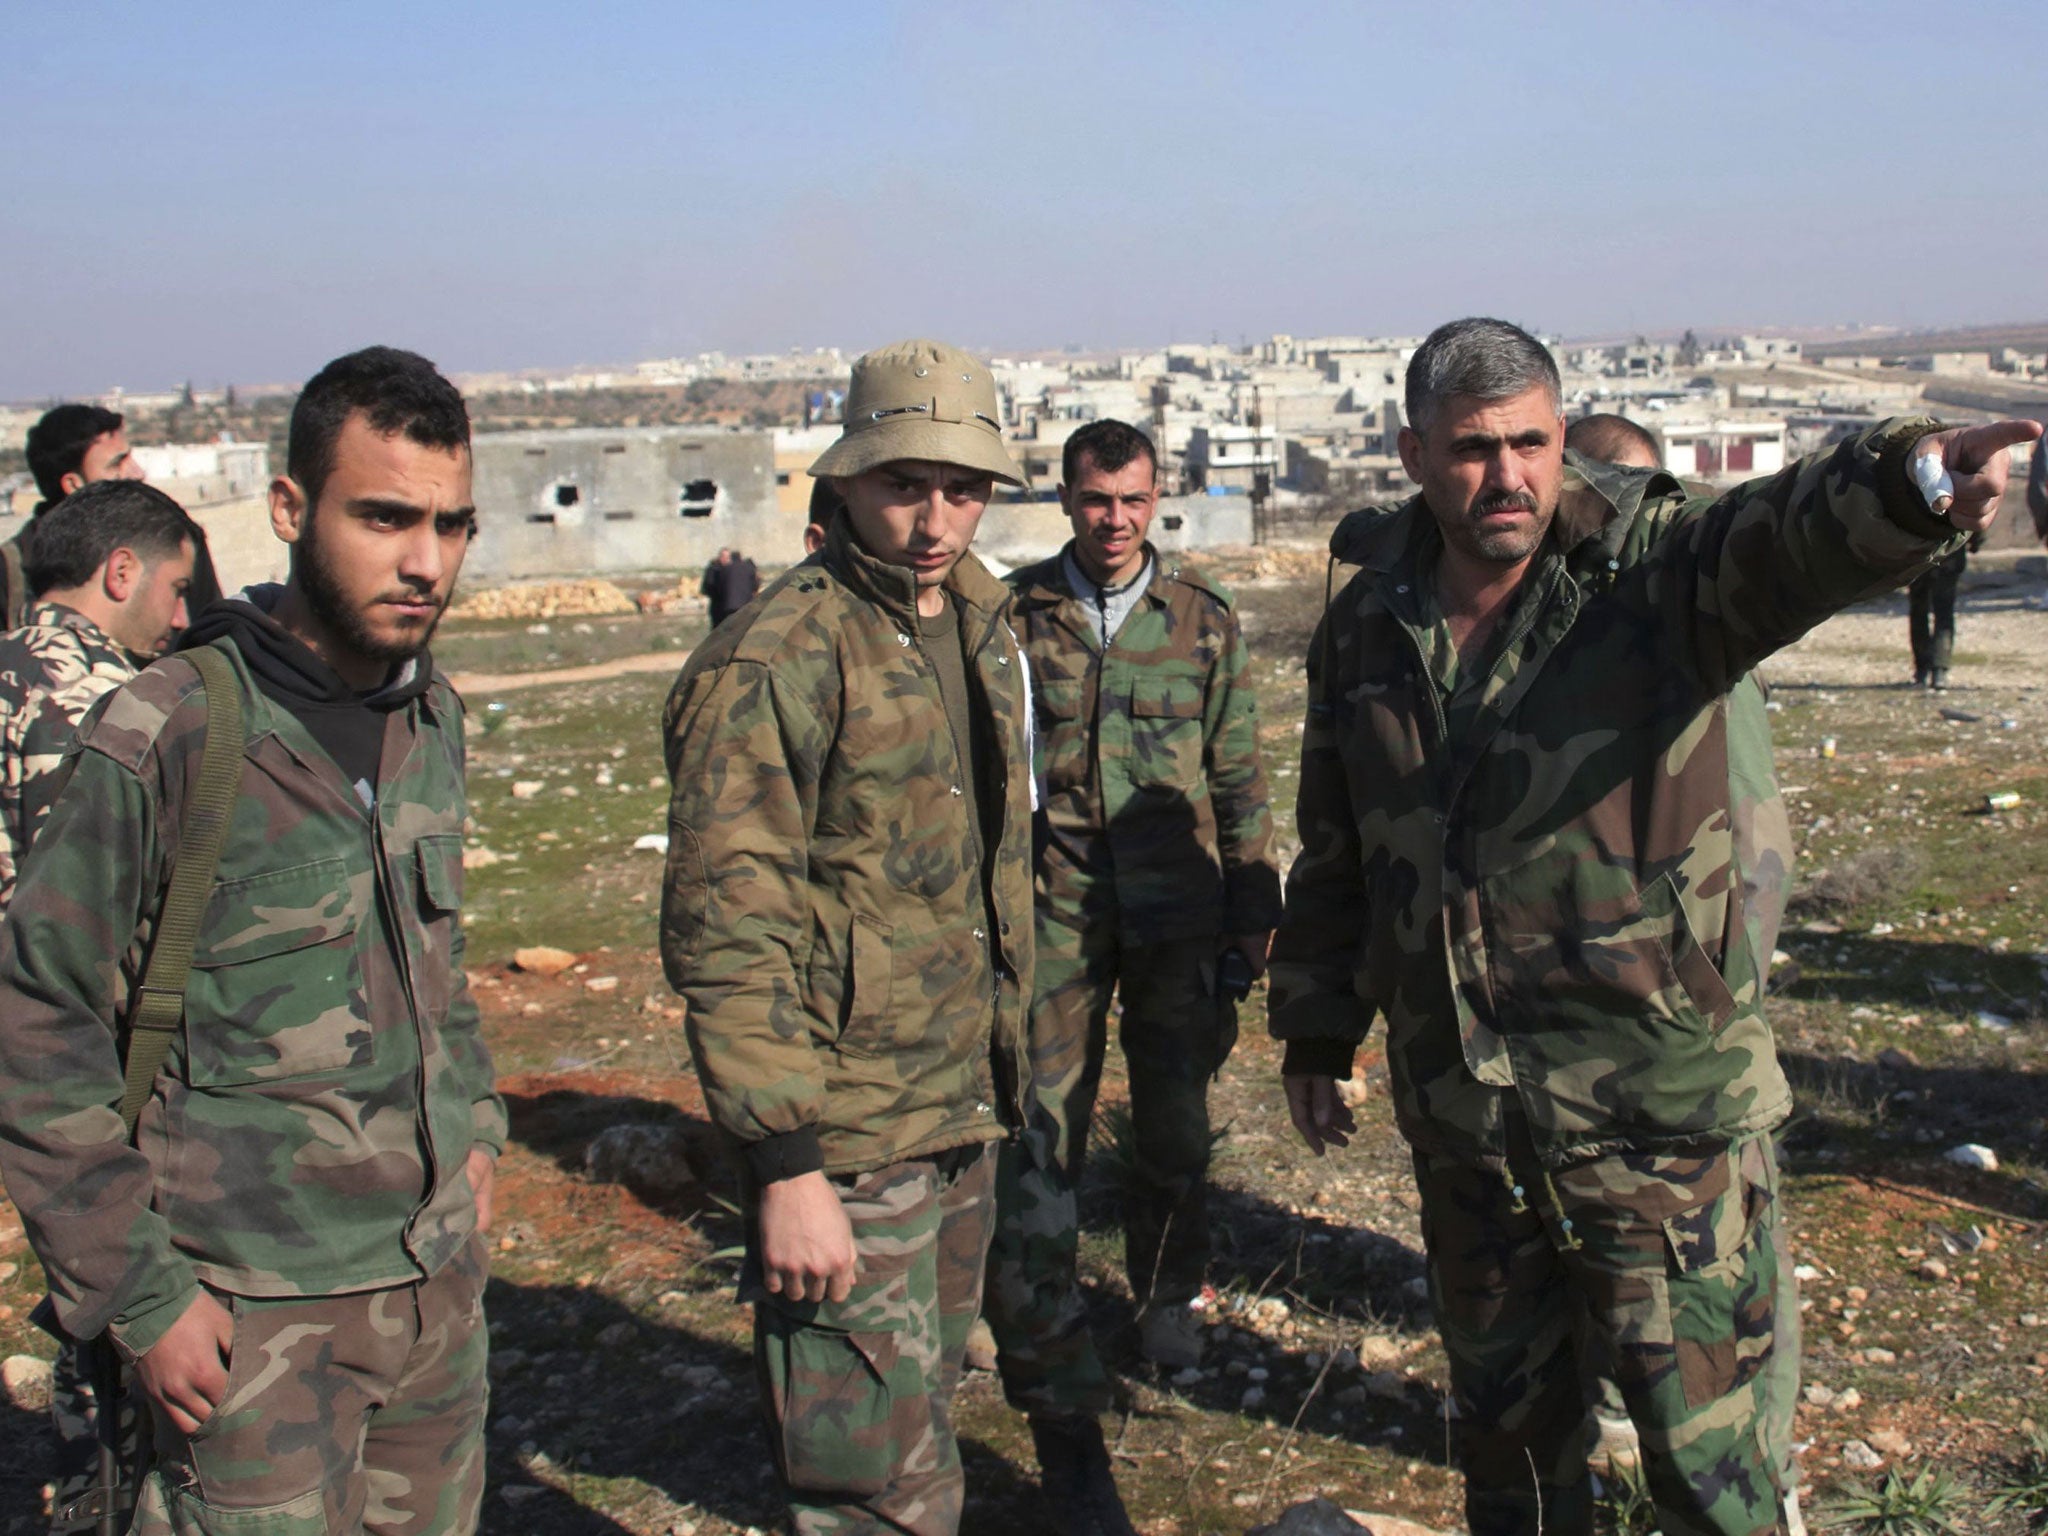 Division: Forces of Syria's Alawite (Shia) regime